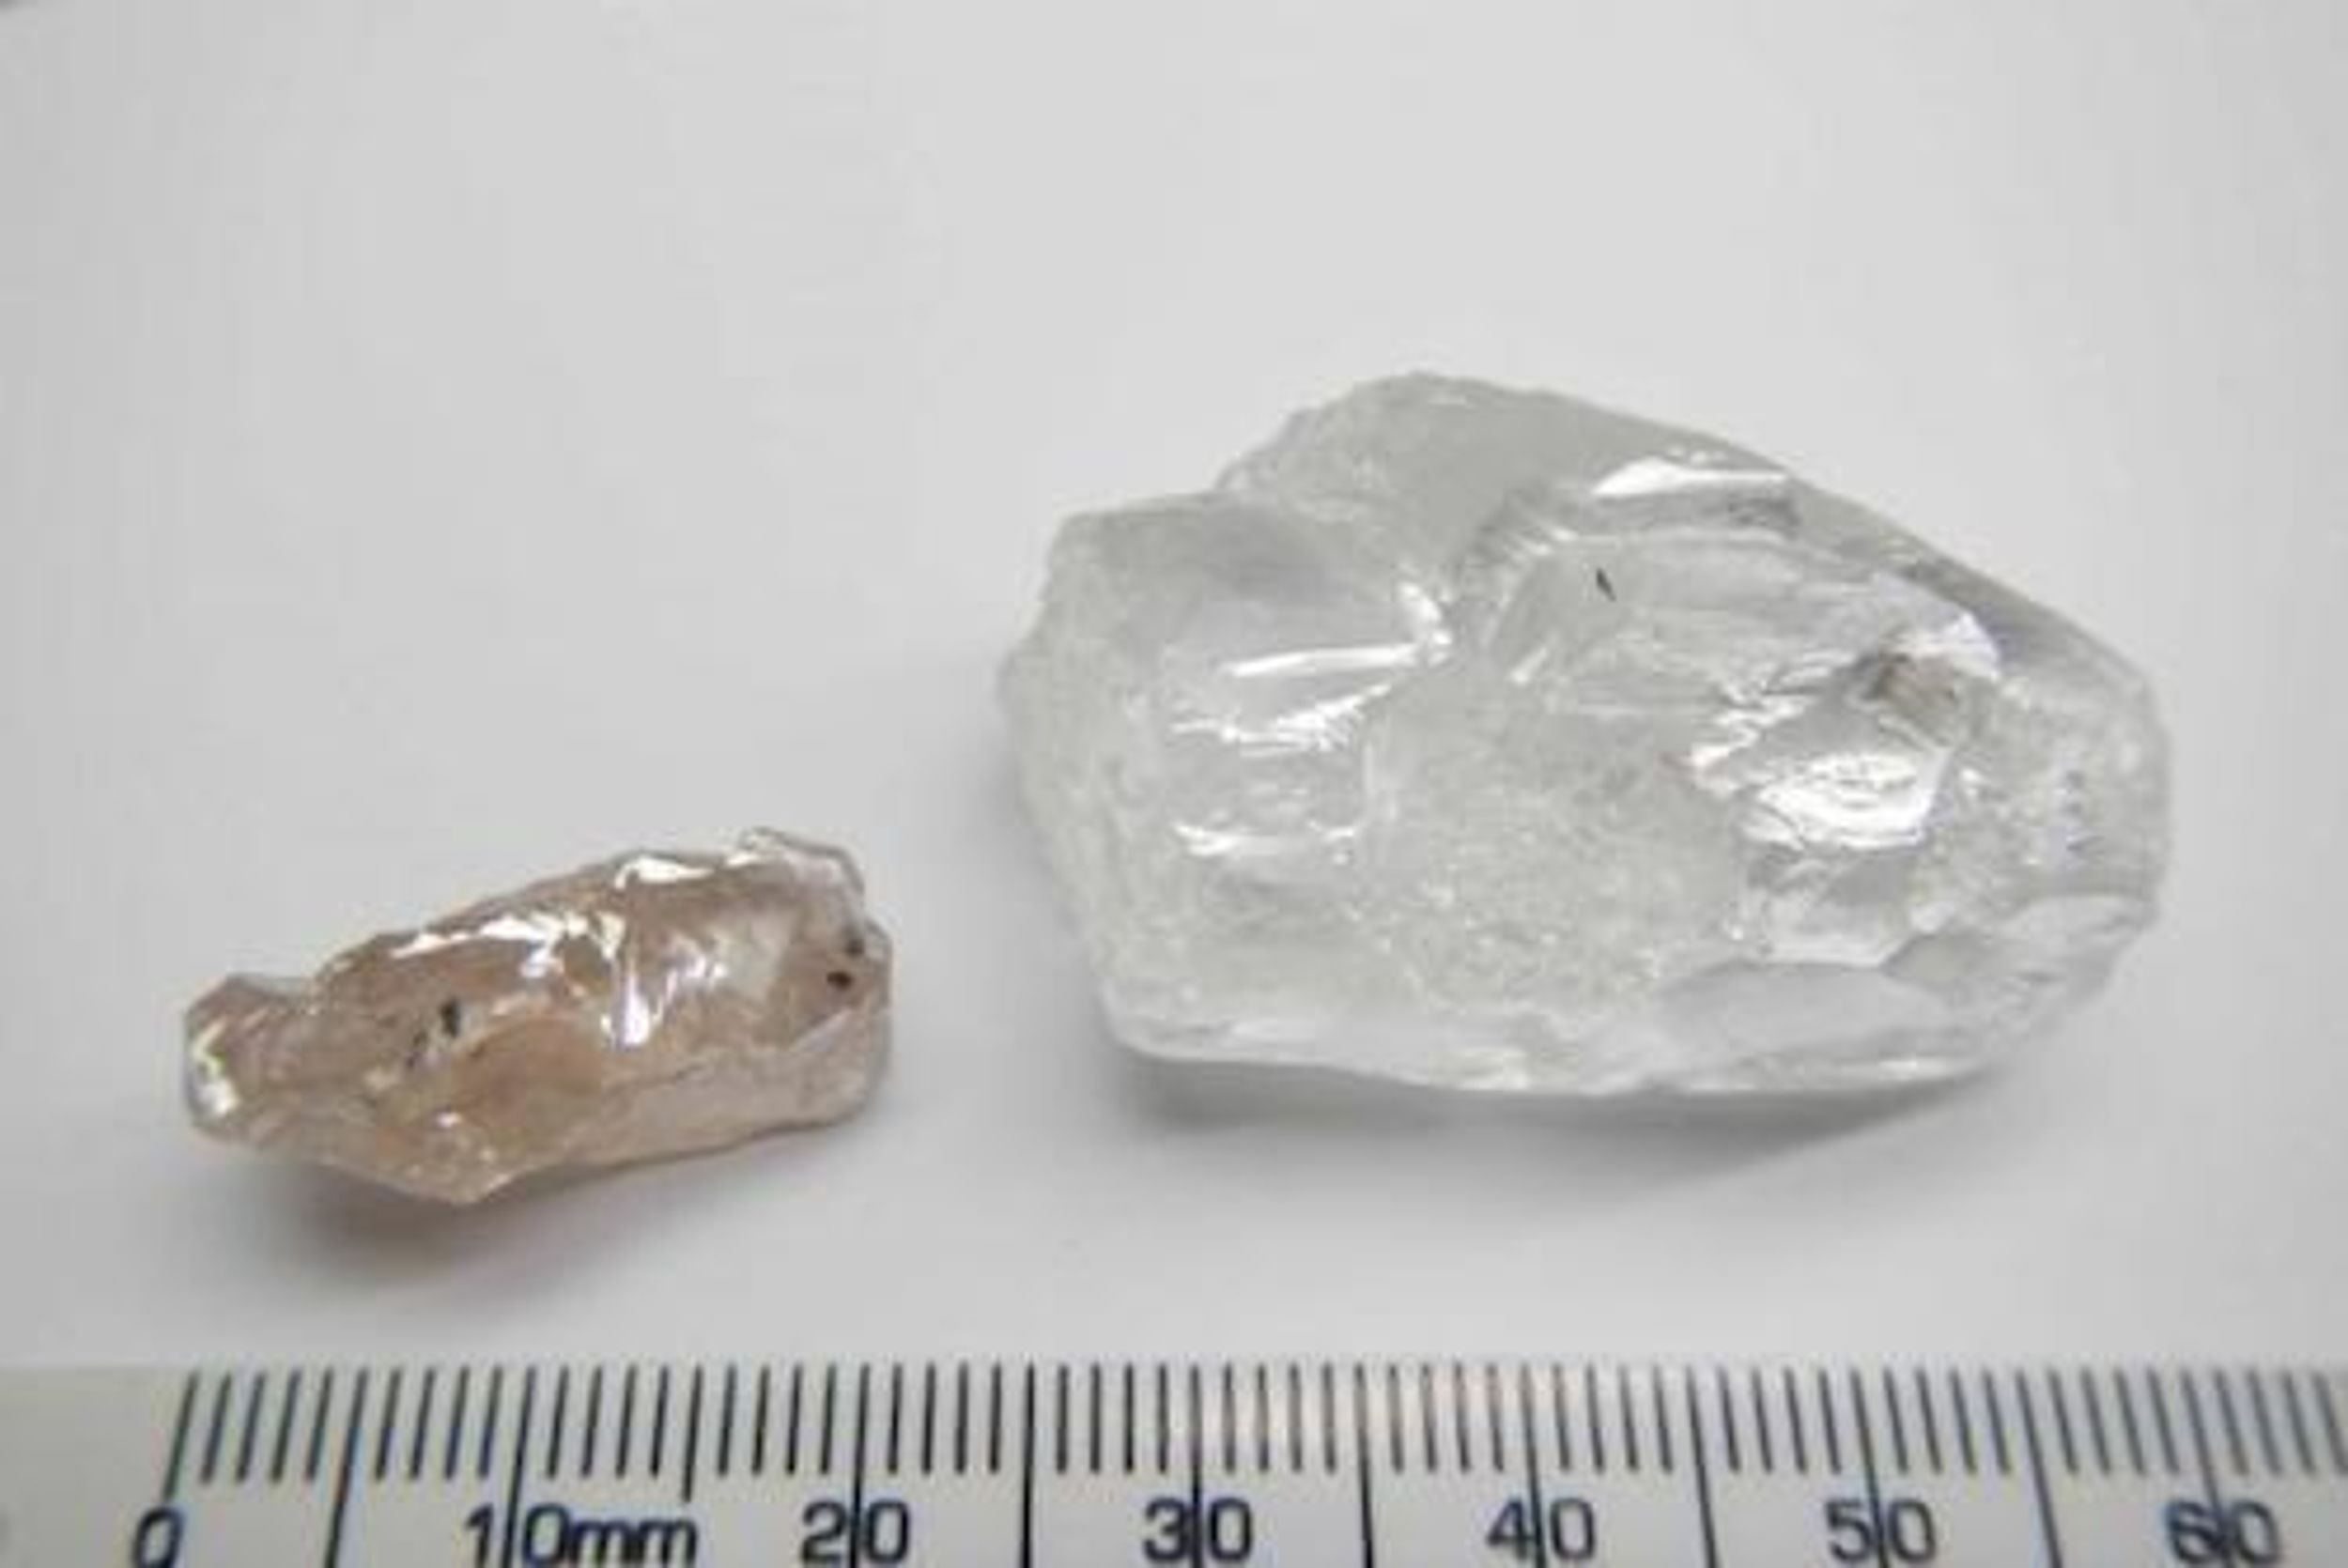 Lucapa Recovers Another Diamond Over 100 Carats in Angola